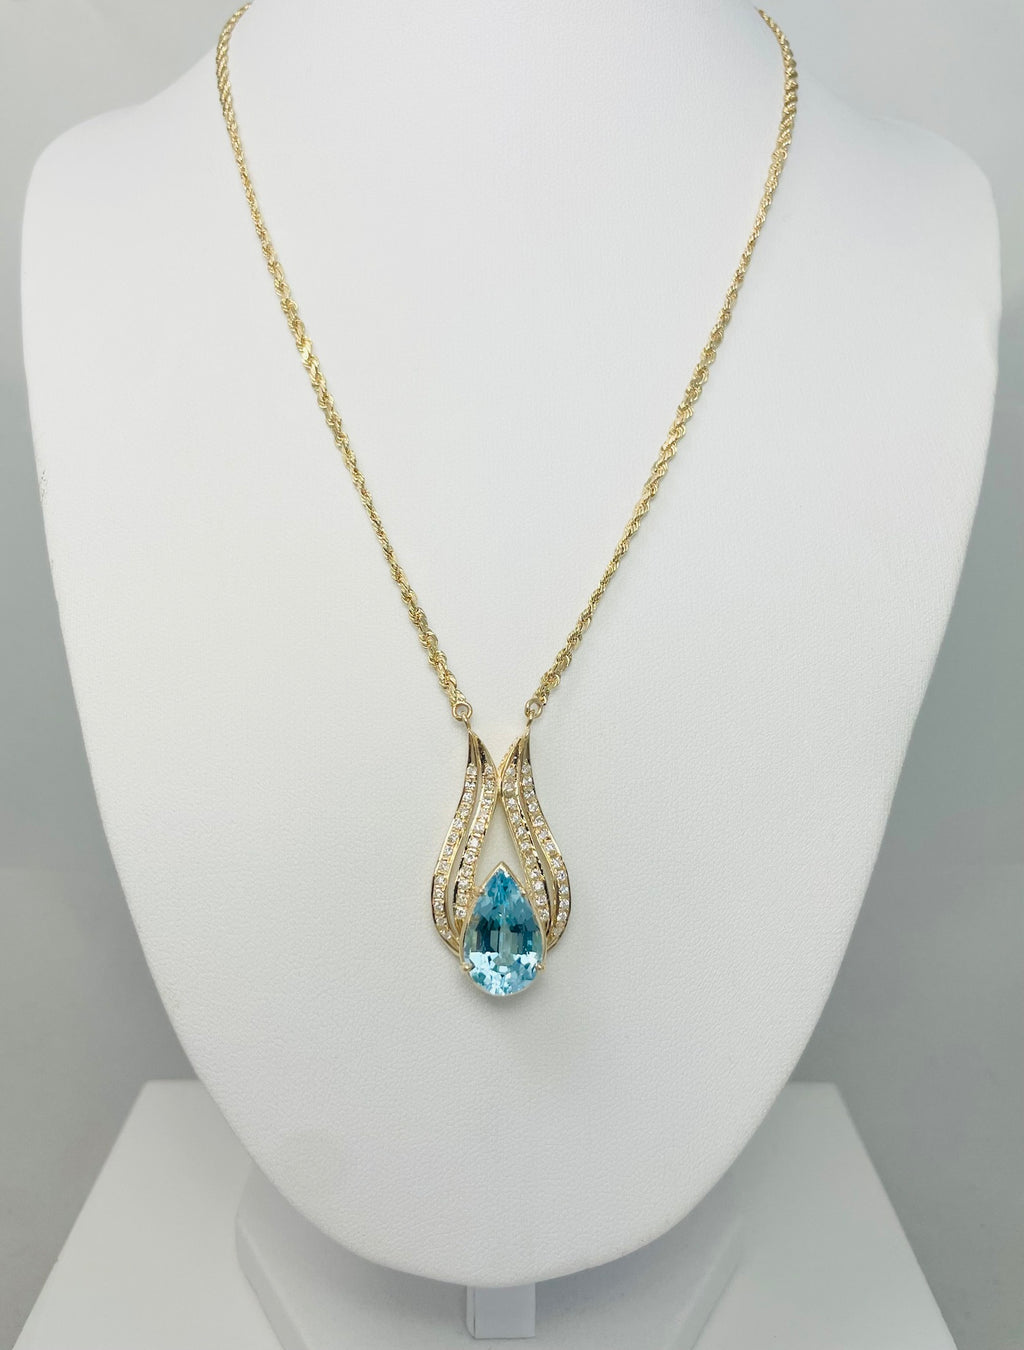 Exquisite Solid 14k Yellow Gold 7.35ctw Natural Blue Topaz & Natural Diamond Pendant 16.25" Necklace